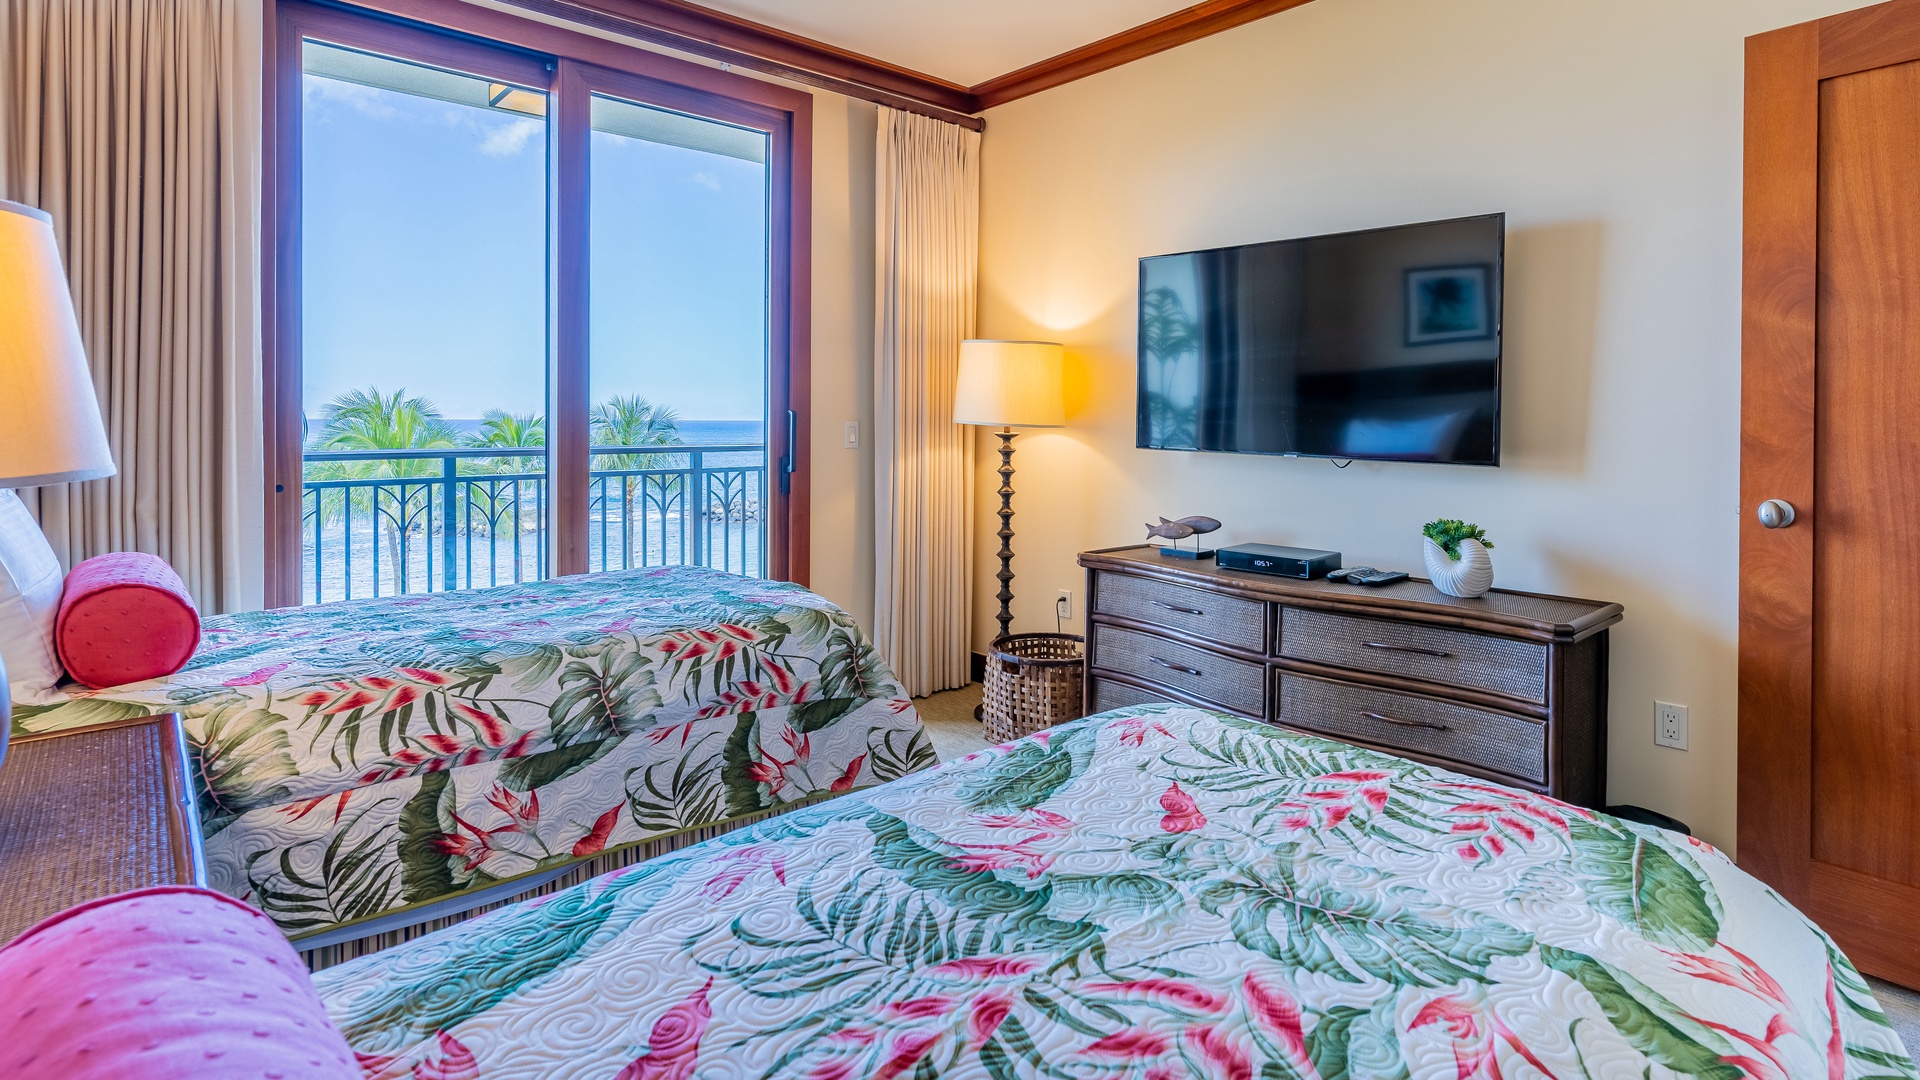 Kapolei Vacation Rentals, Ko Olina Beach Villas B410 - The second guest bedroom with TV and a view.